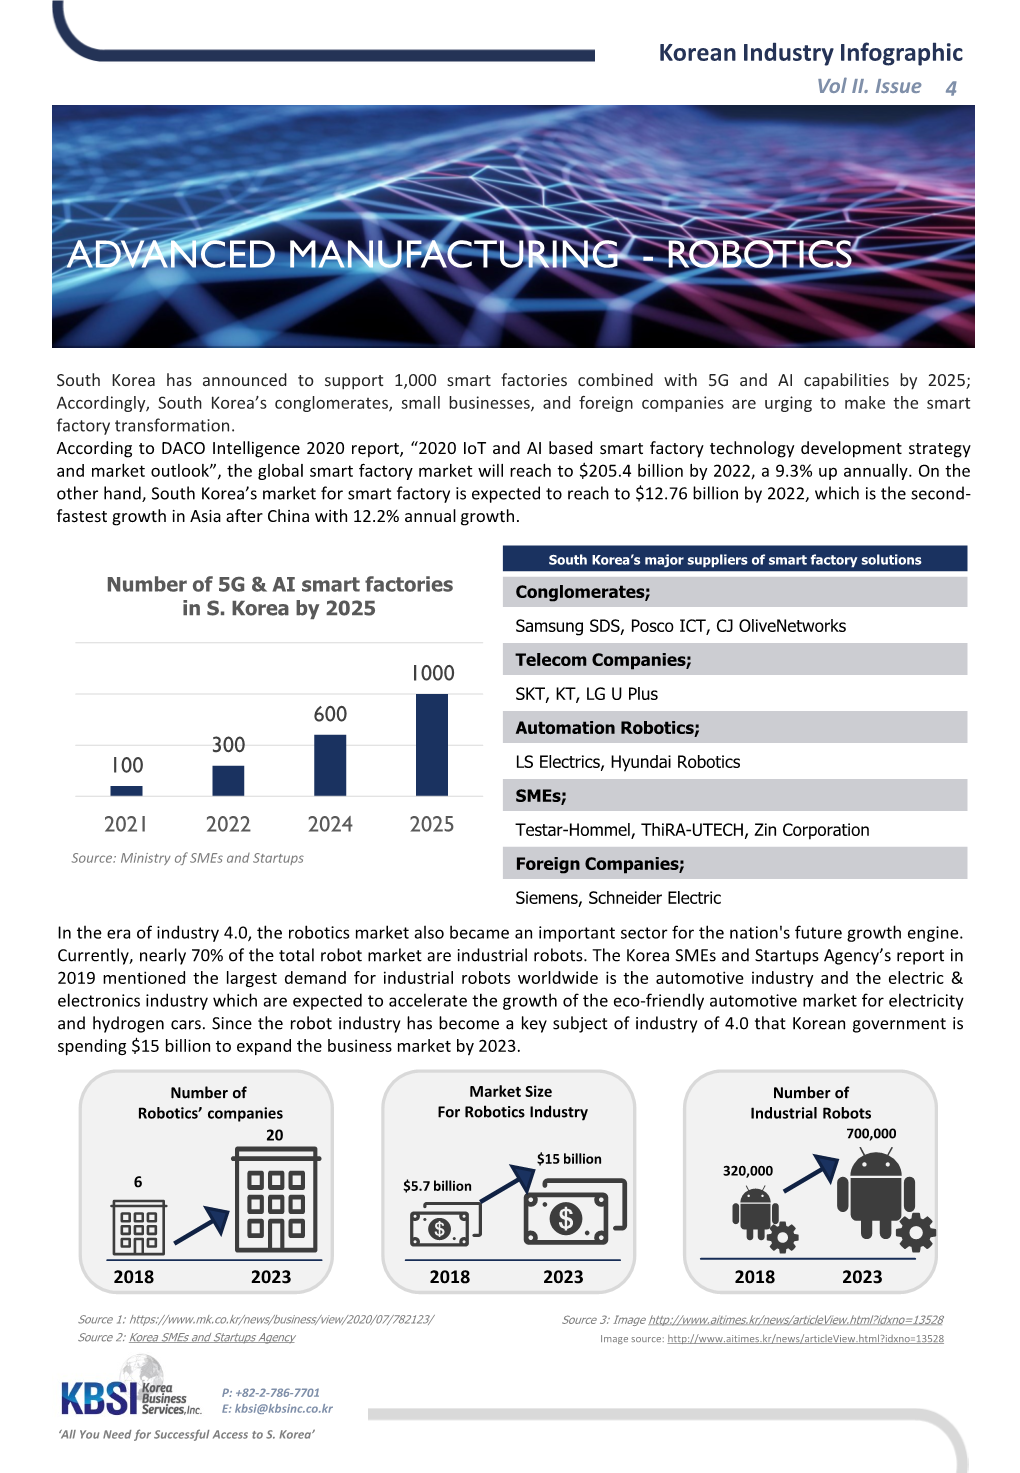 Read the Full Advanced Manufacturing Report from KBSI